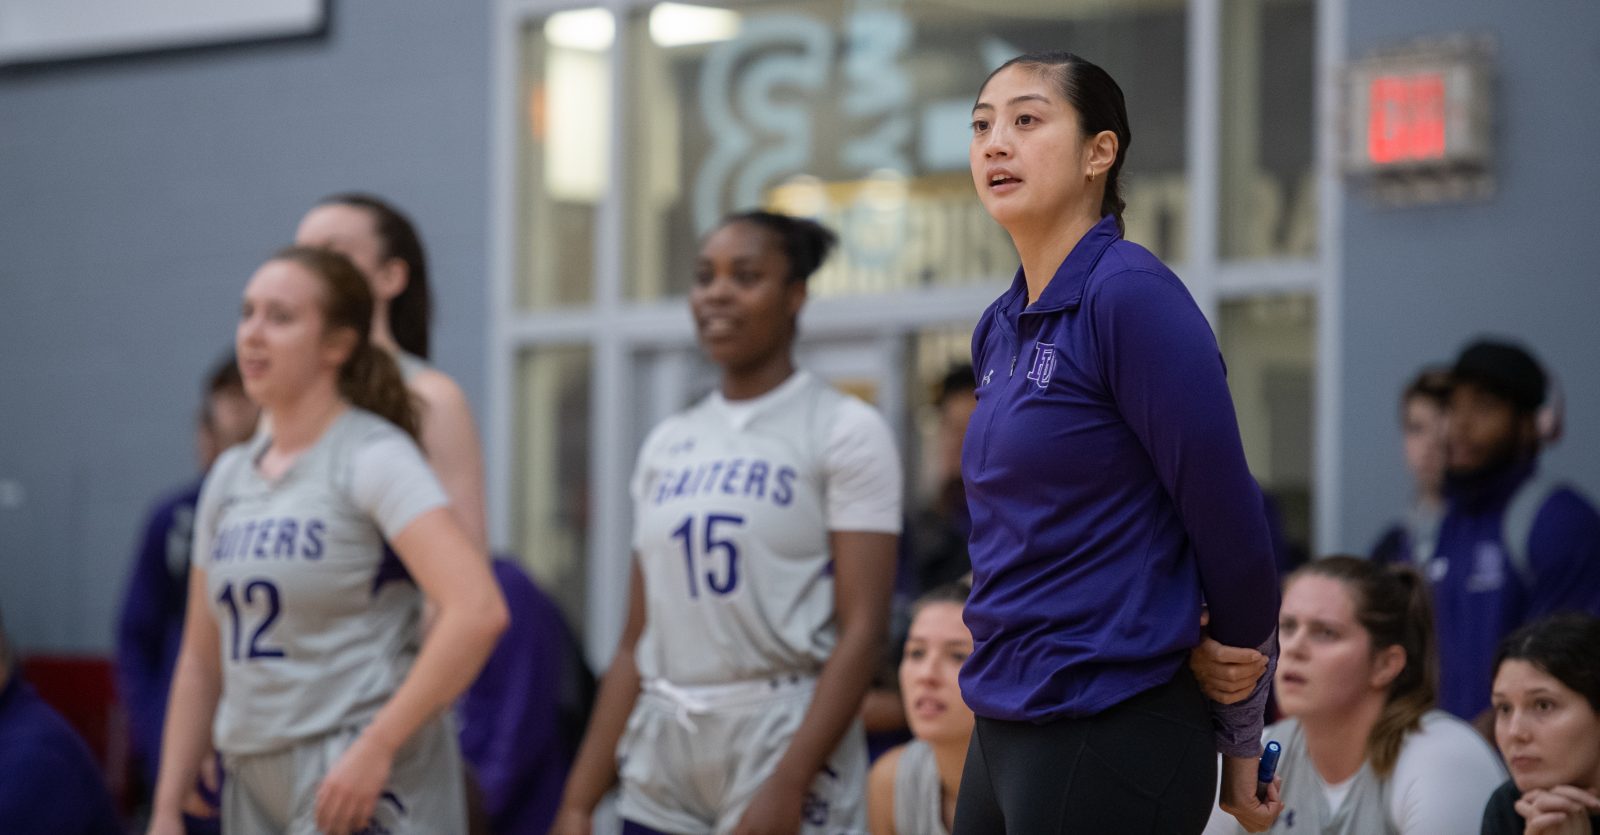 Gaiters women’s basketball team takes nation by storm